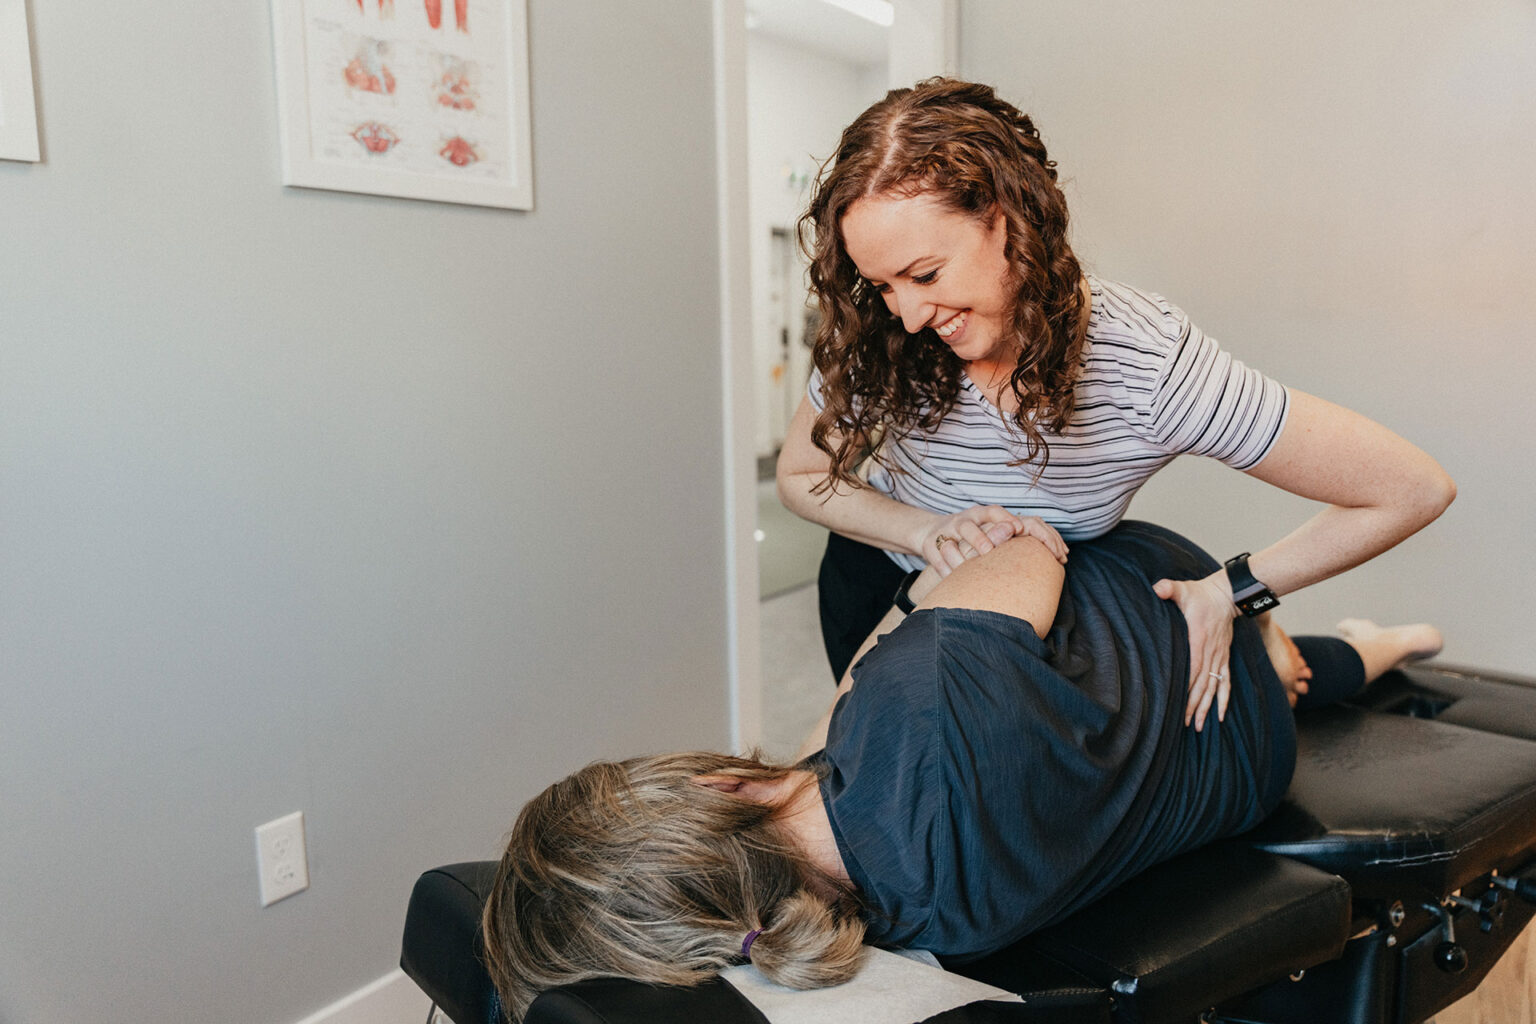 Maggie-performing-a-chiropractic-service-on-a-client